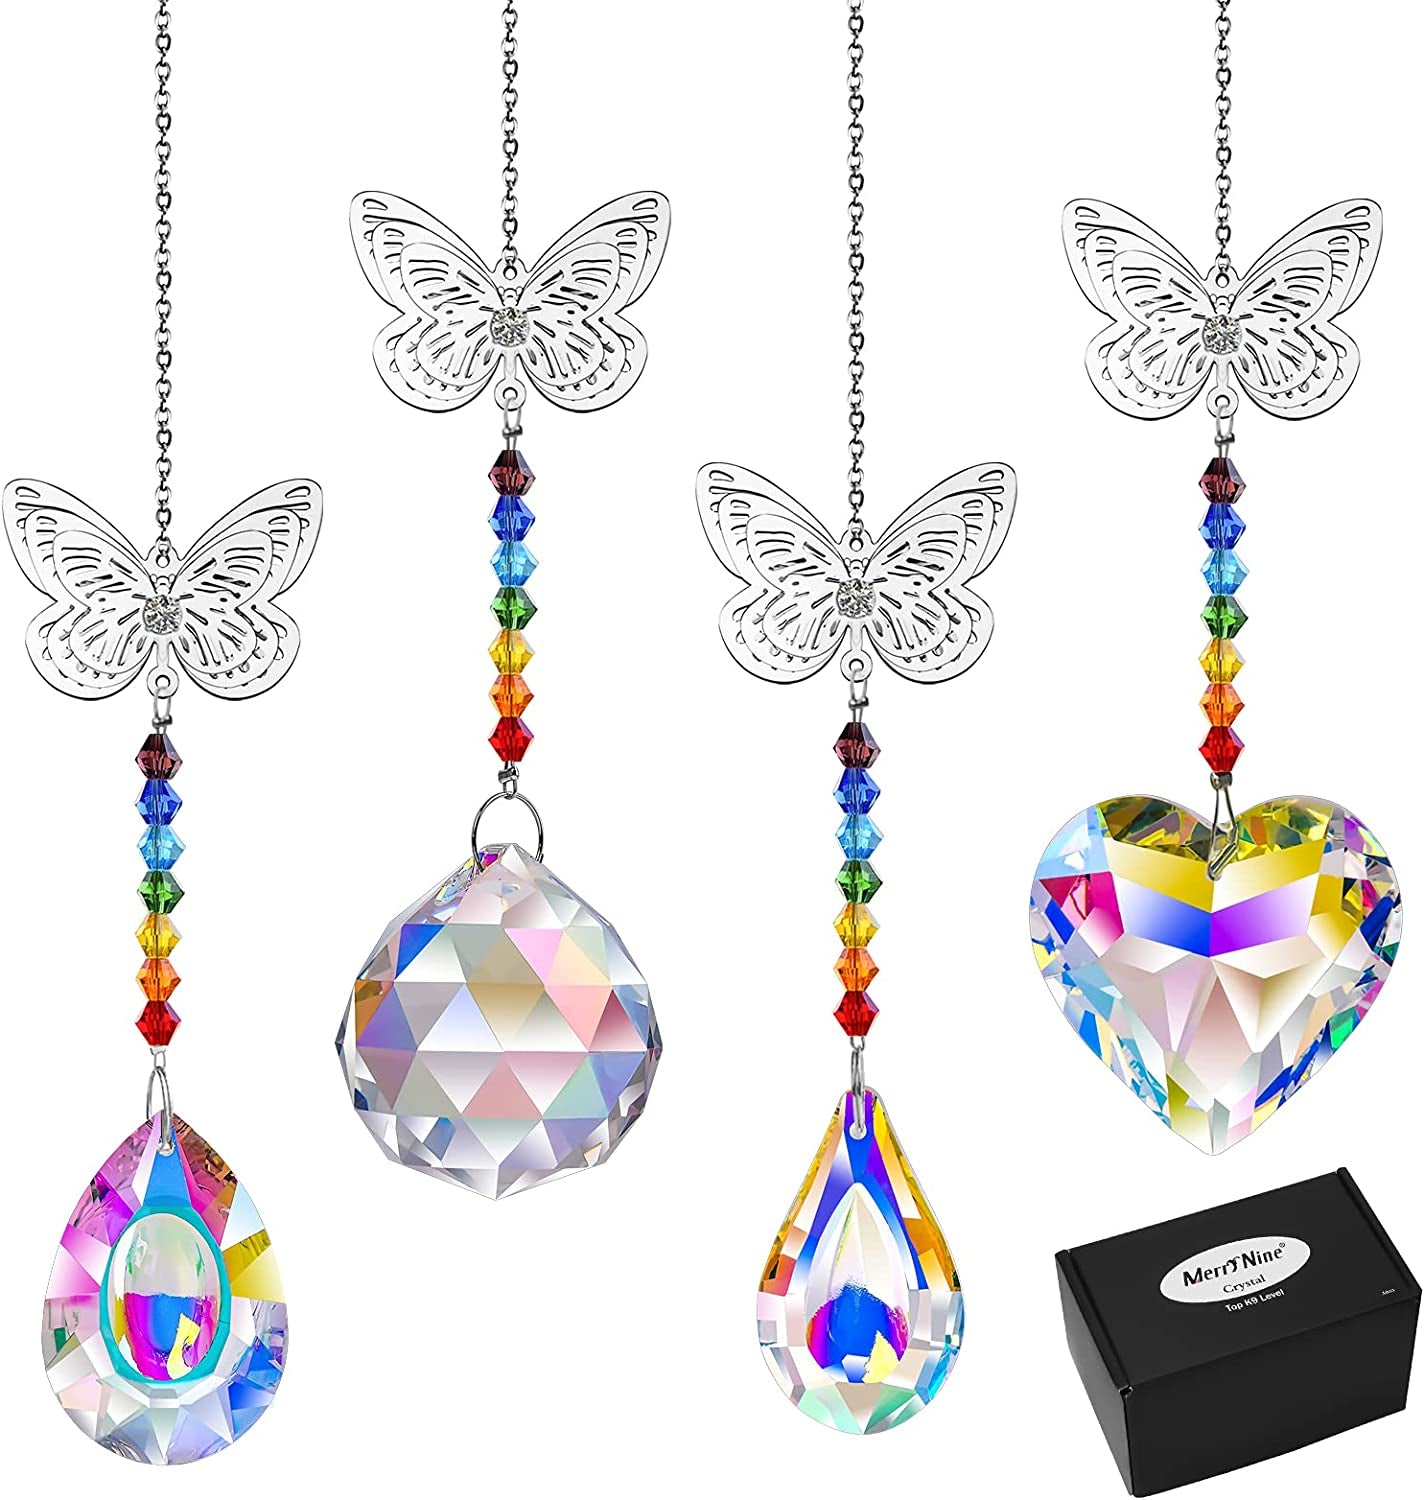 MerryNine, Merrynine 4 PCS Crystal Sunshine Catcher Colorful Heart/ Pipa/ Longan/ Crystal Prism Ball+Butterfly Pendant Windowsill Rainbow Hanging for Home Garden Window Car Decoration Christmas Tree Decoration